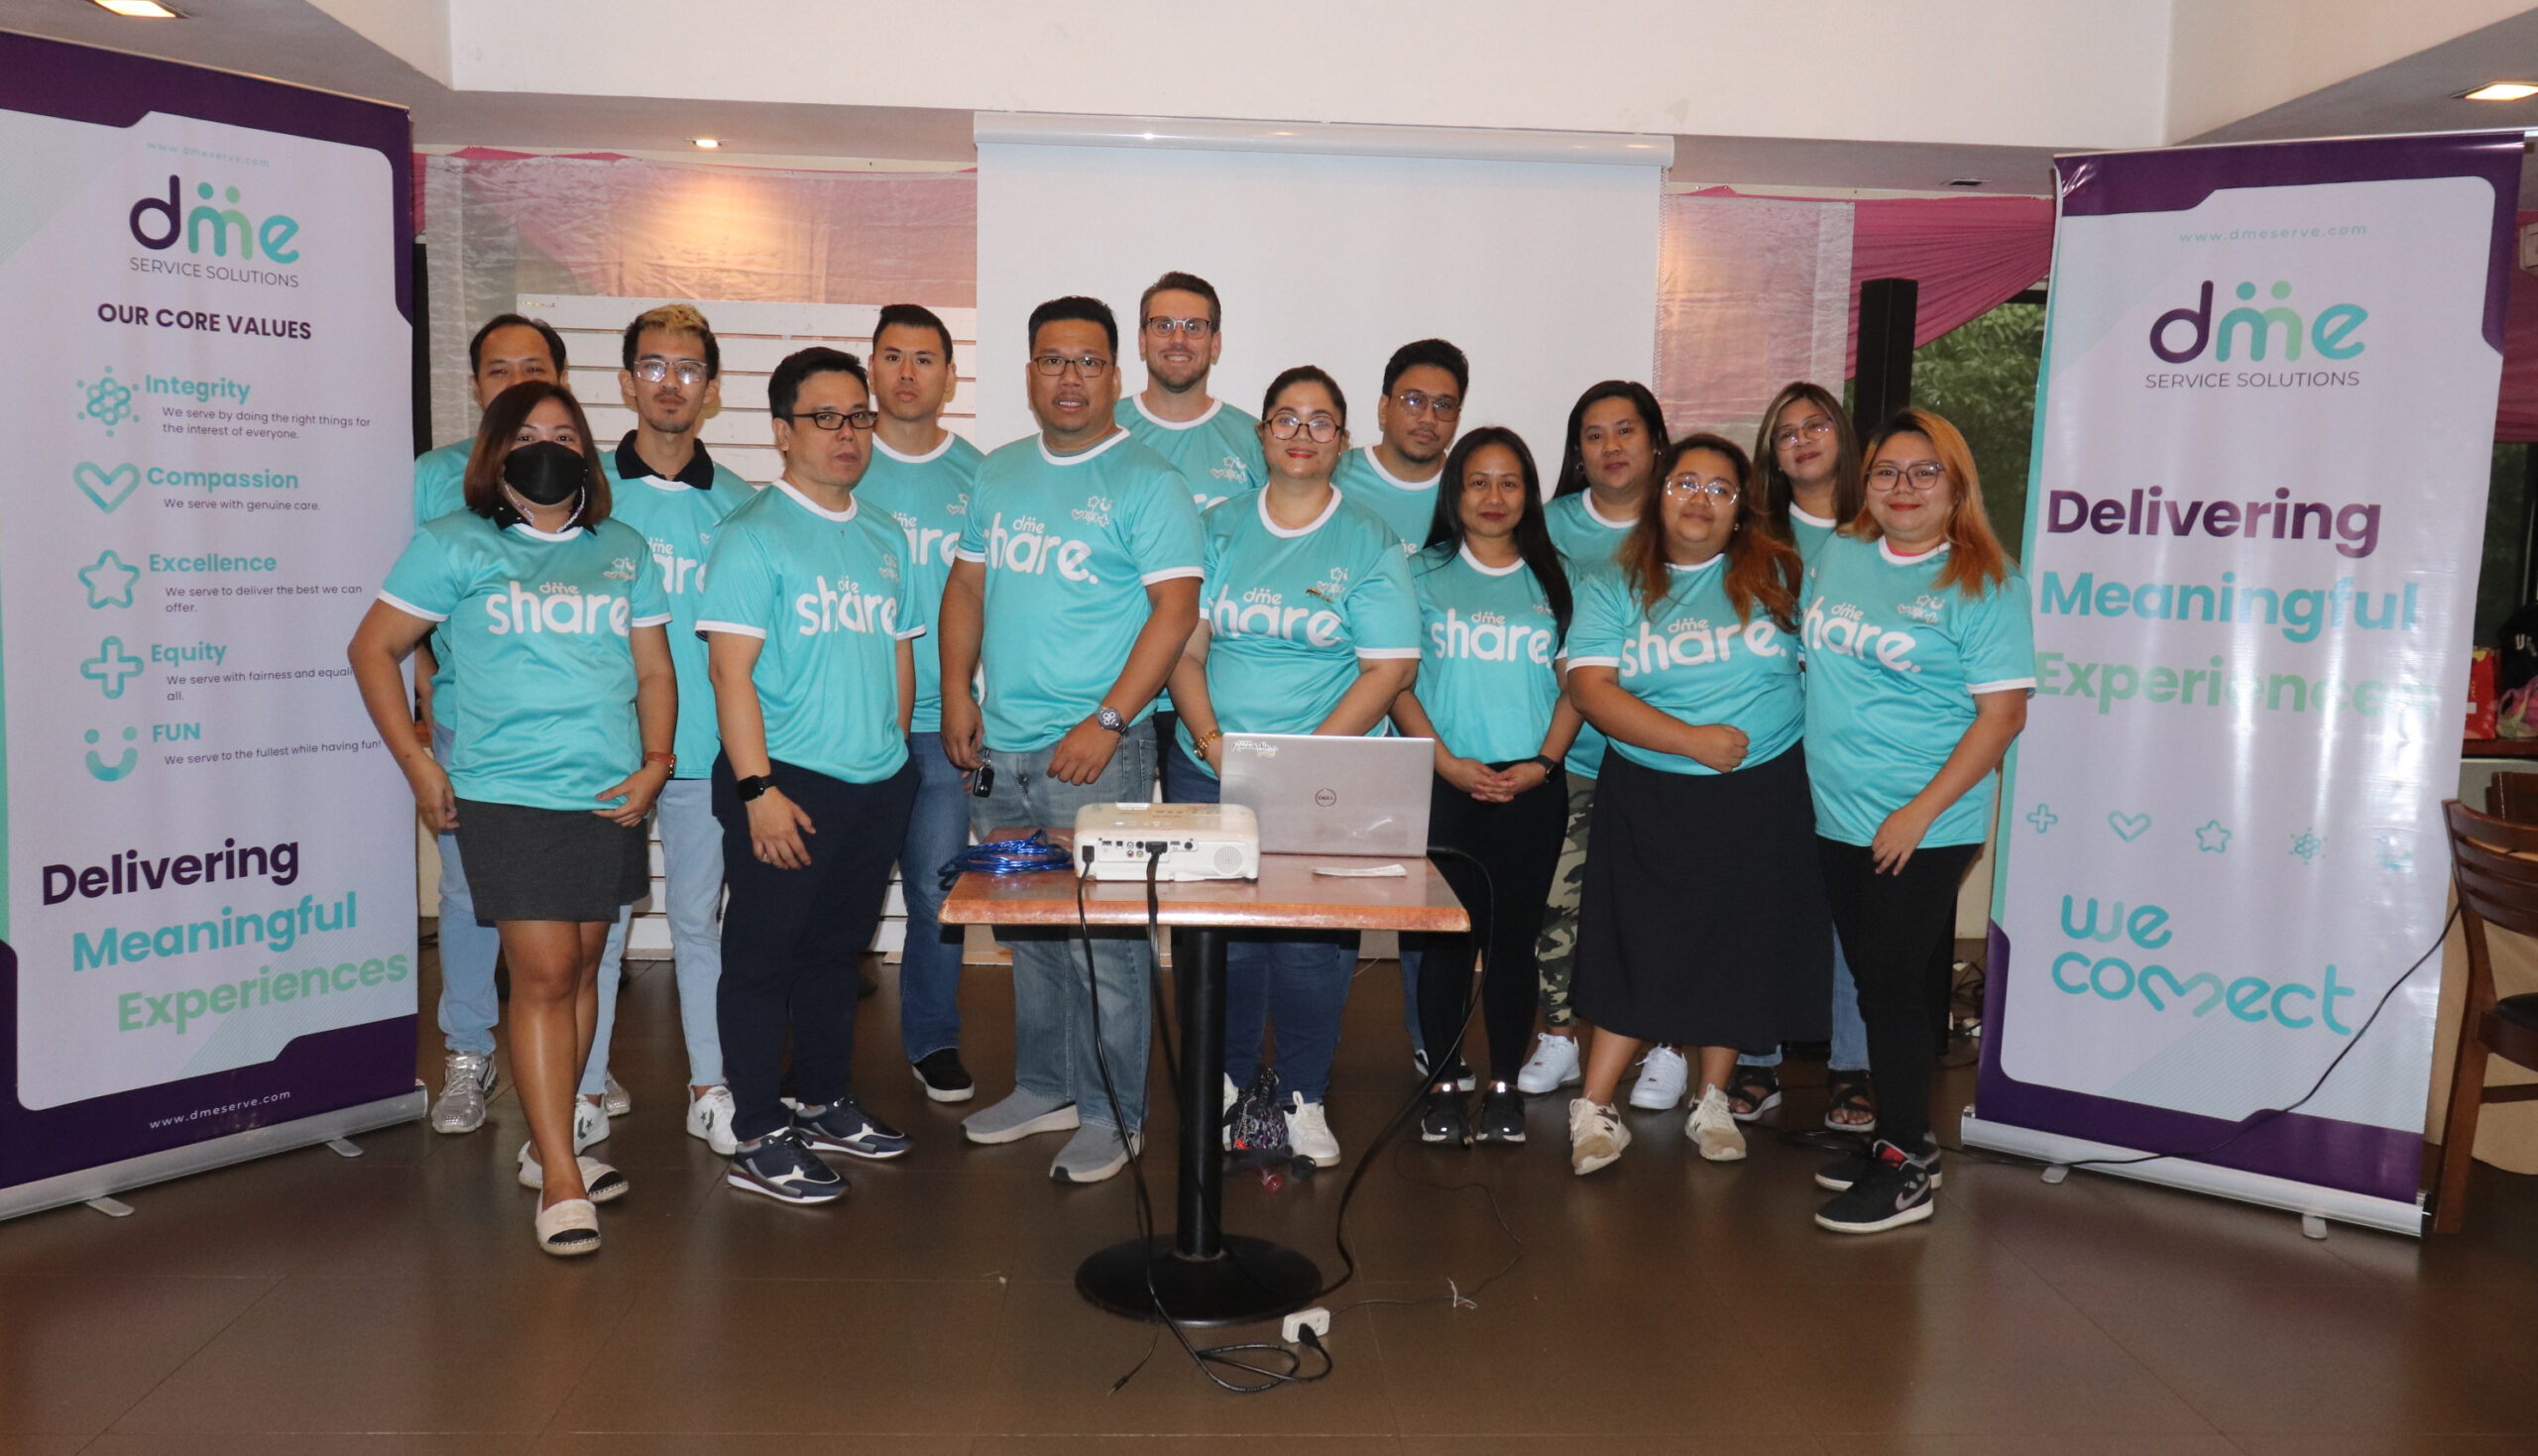 DME Service Solutions Launches First Remarkable CSR Event